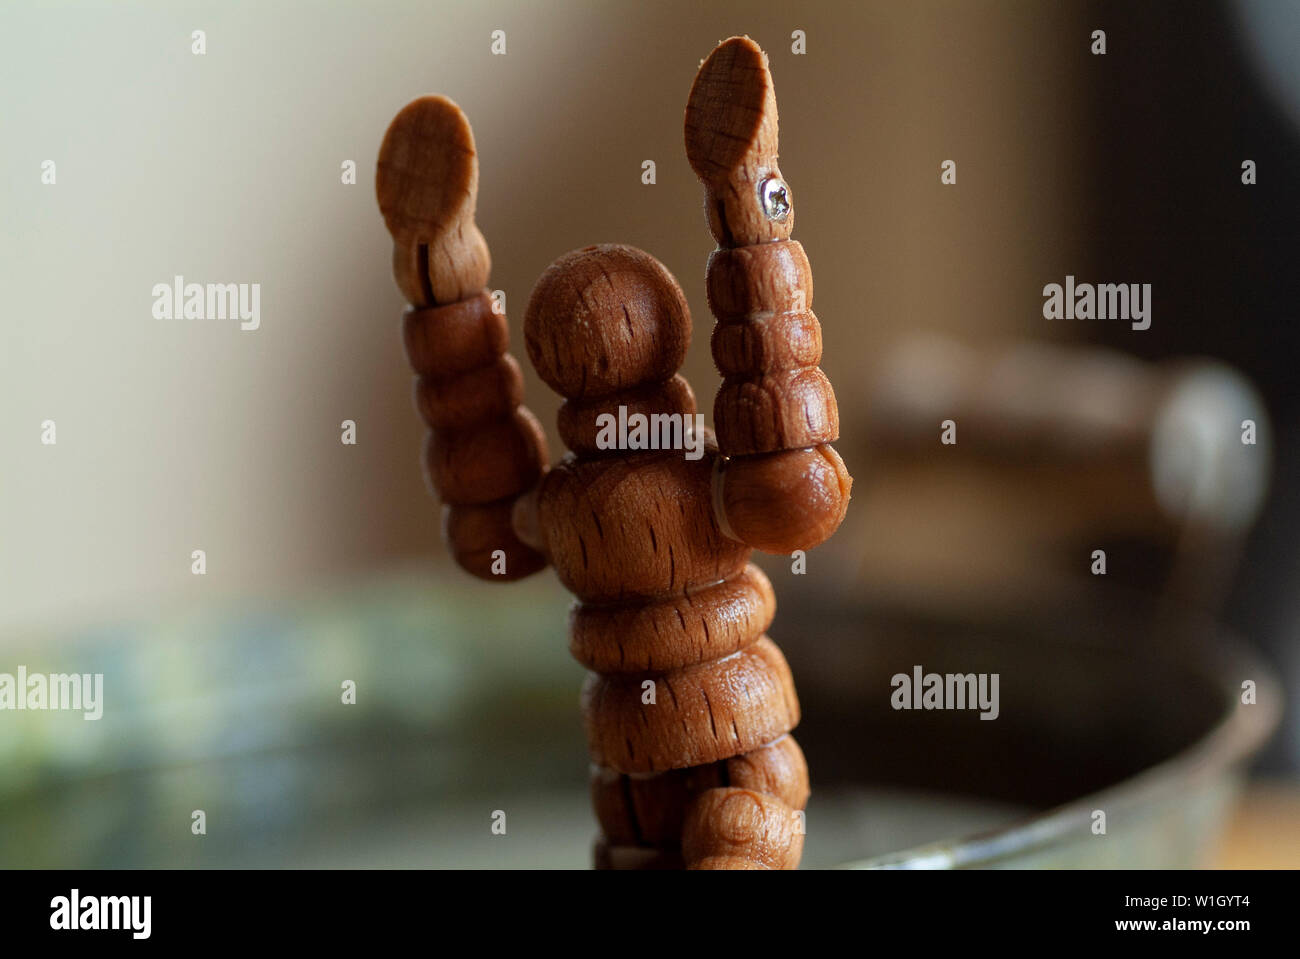 TRANSPORTED MAN Harrowing tale of a time travel experiment gone wrong leaving a wooden man in a paradox of constantly evolving and changing realities. Stock Photo